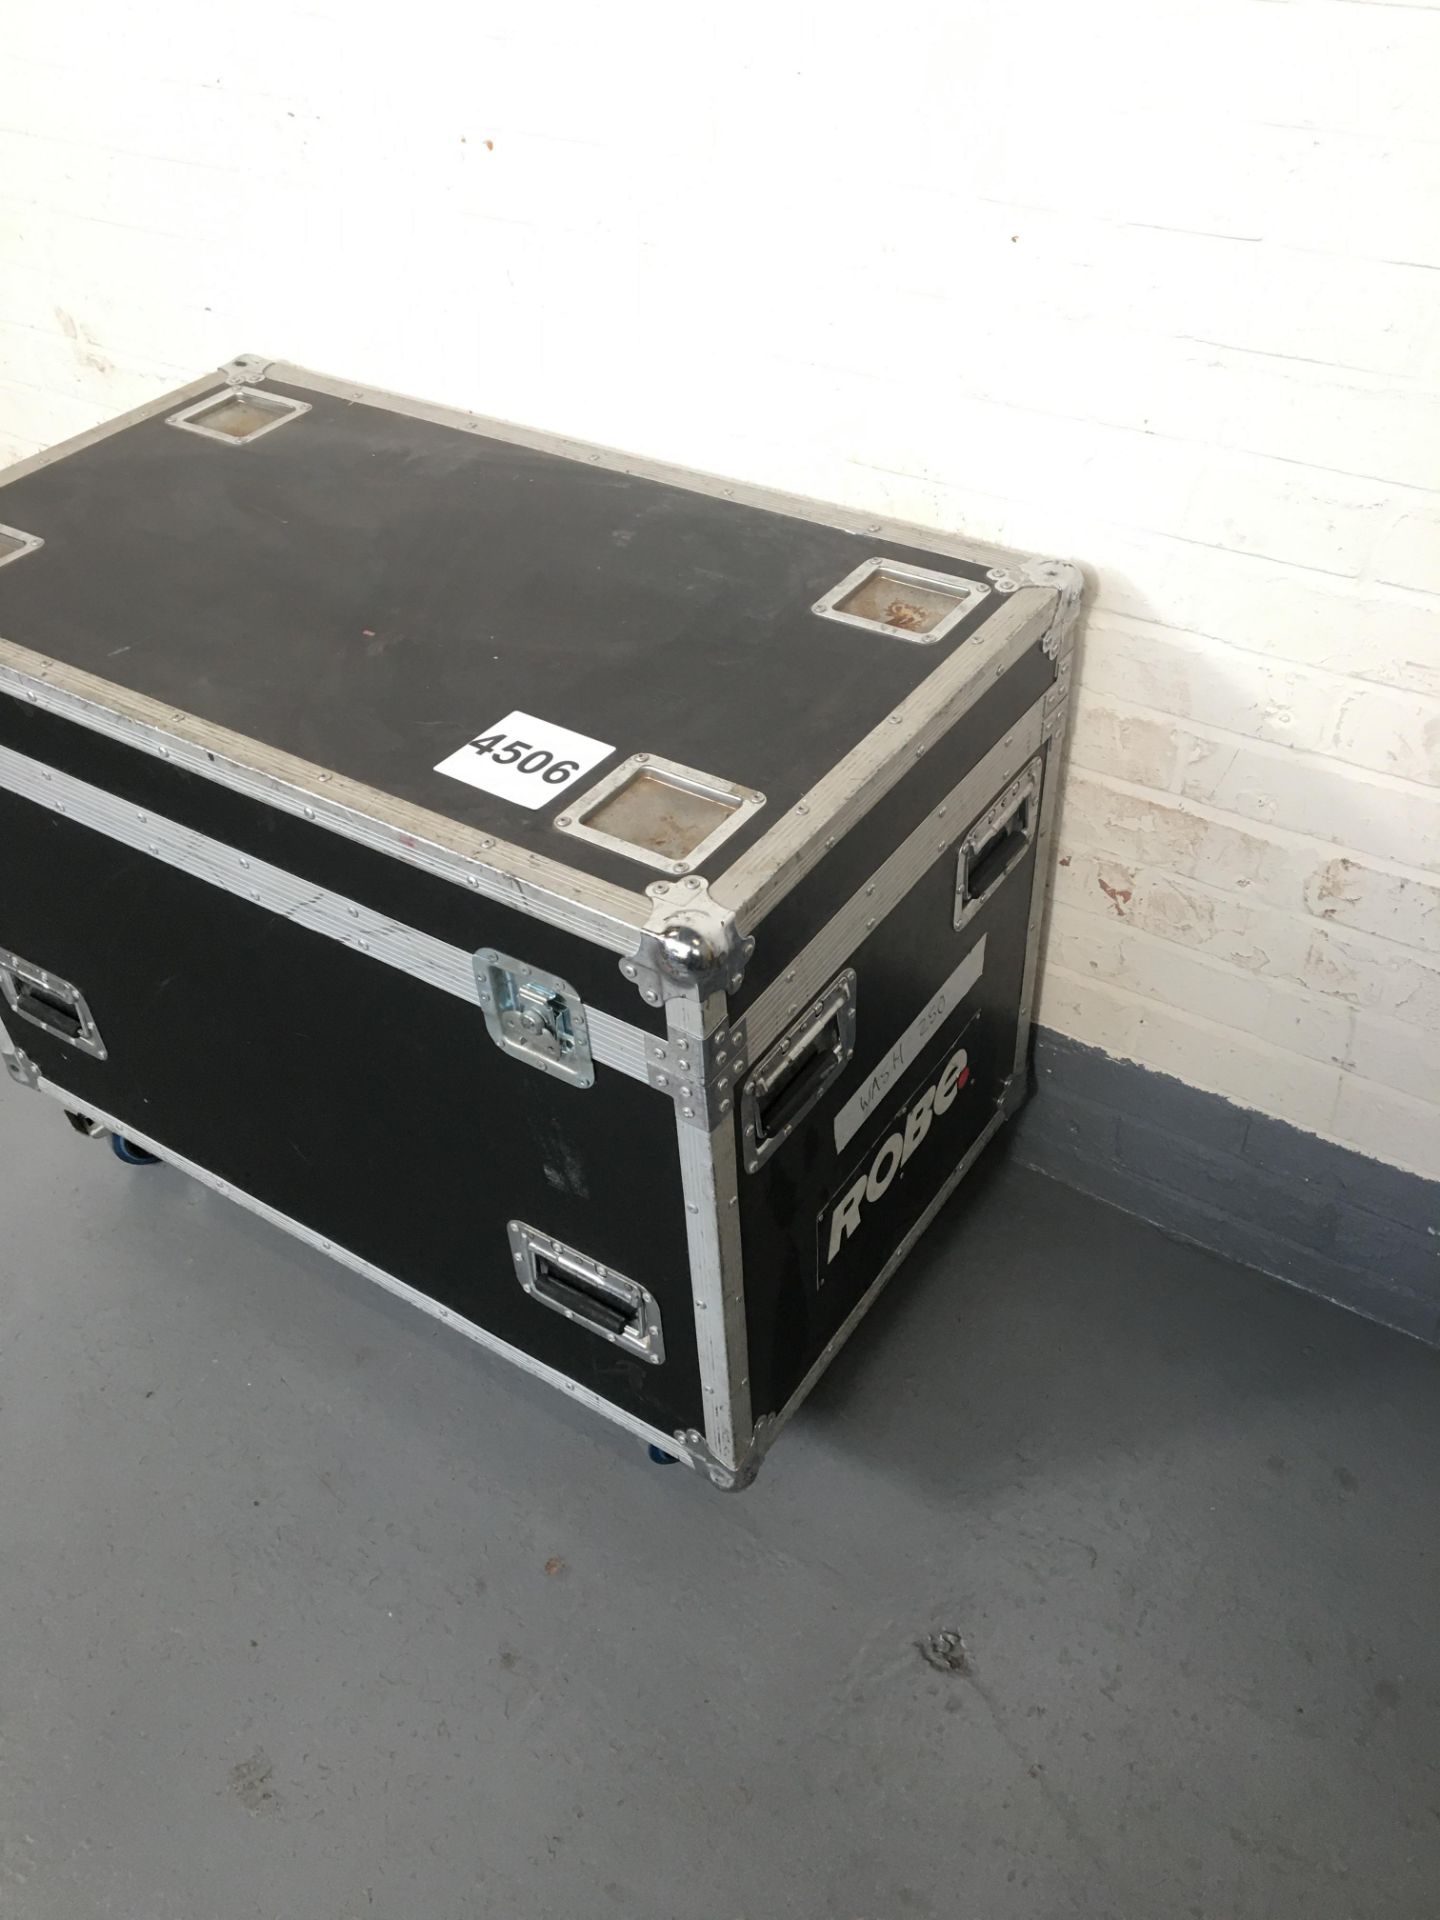 Fitted Flightcase for Robe 250 Wash Moving Light. 565*990*635mm. Condition: Used Ex Hire - Image 3 of 10